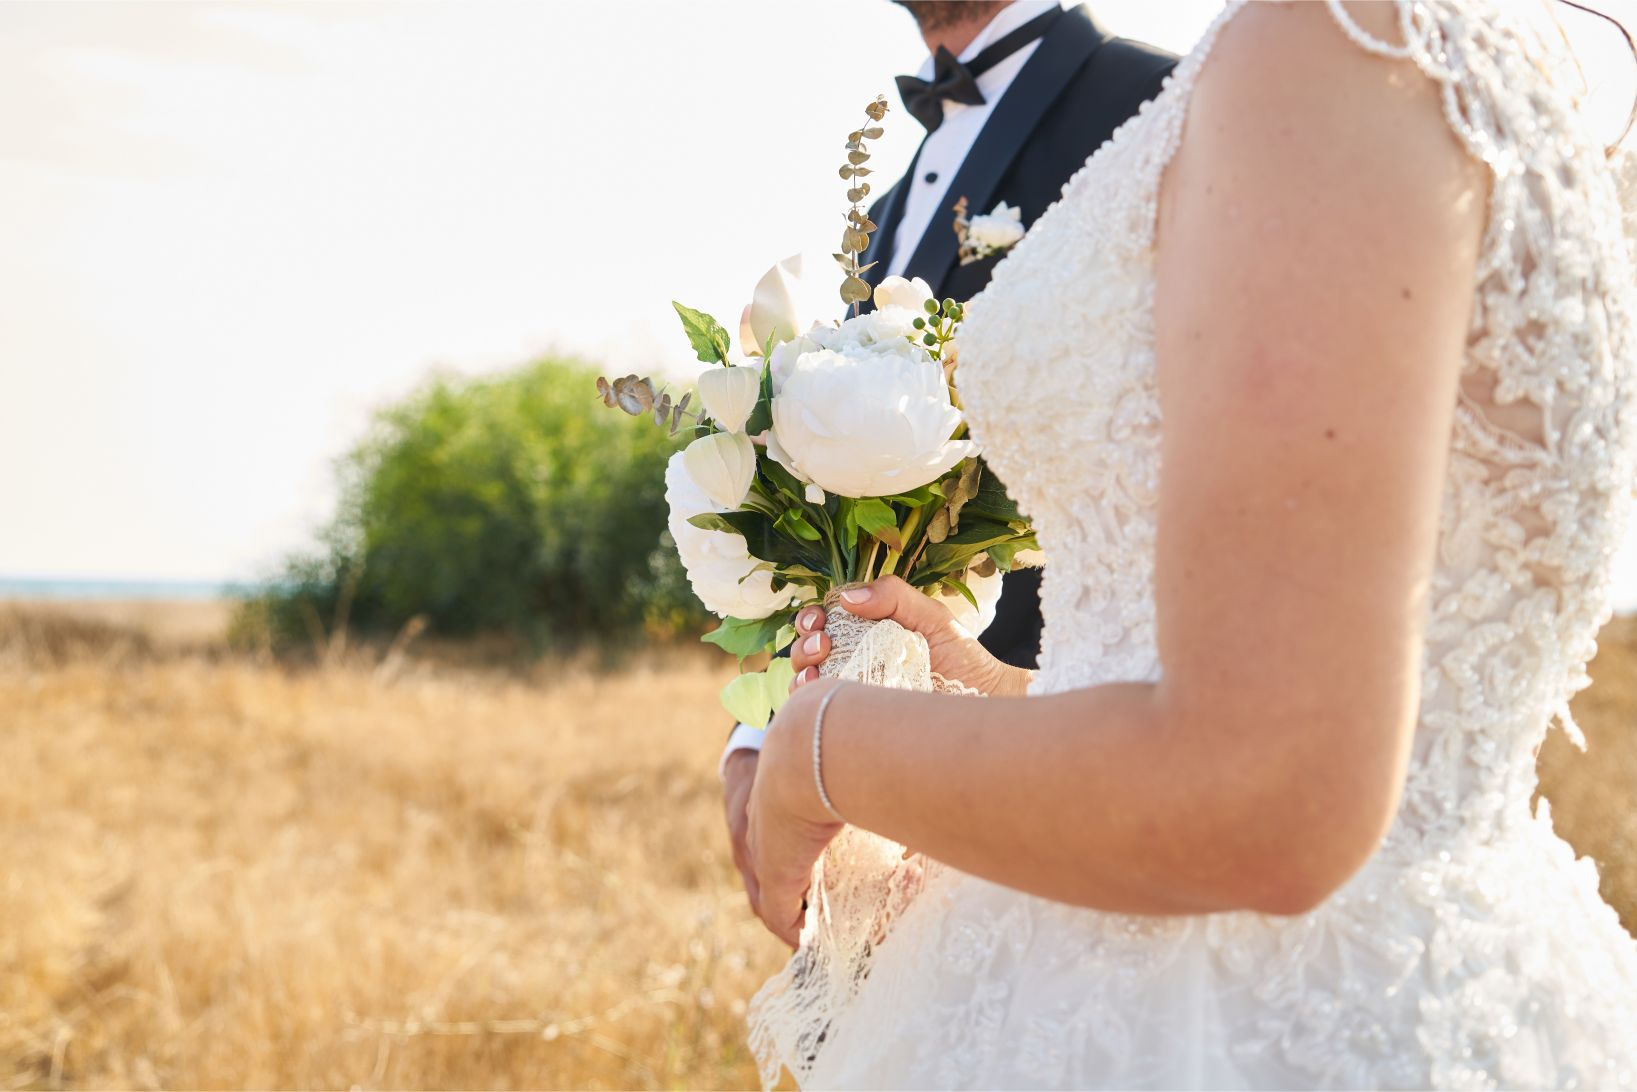 bride holding a bouquet of white peonies